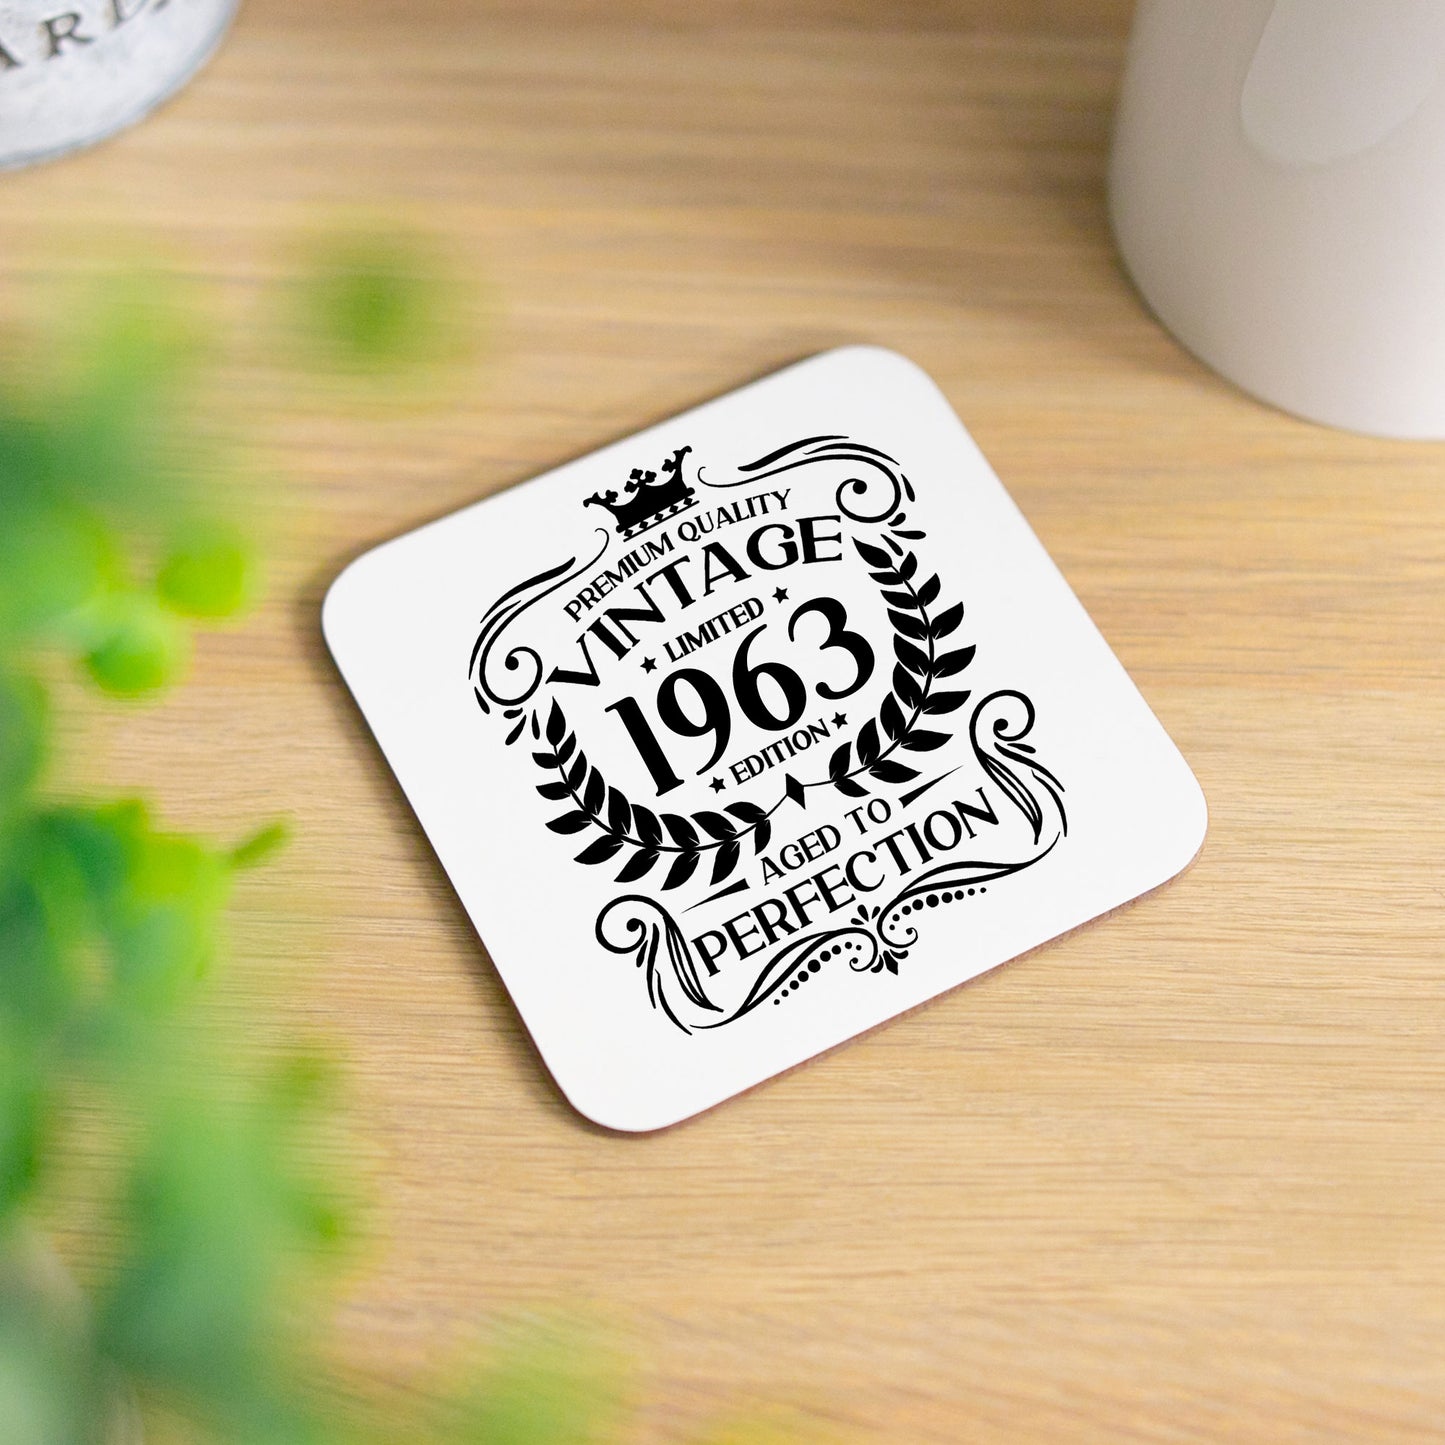 Vintage 1963 60th Birthday Engraved Wine Glass Gift  - Always Looking Good - Glass & Printed Coaster  